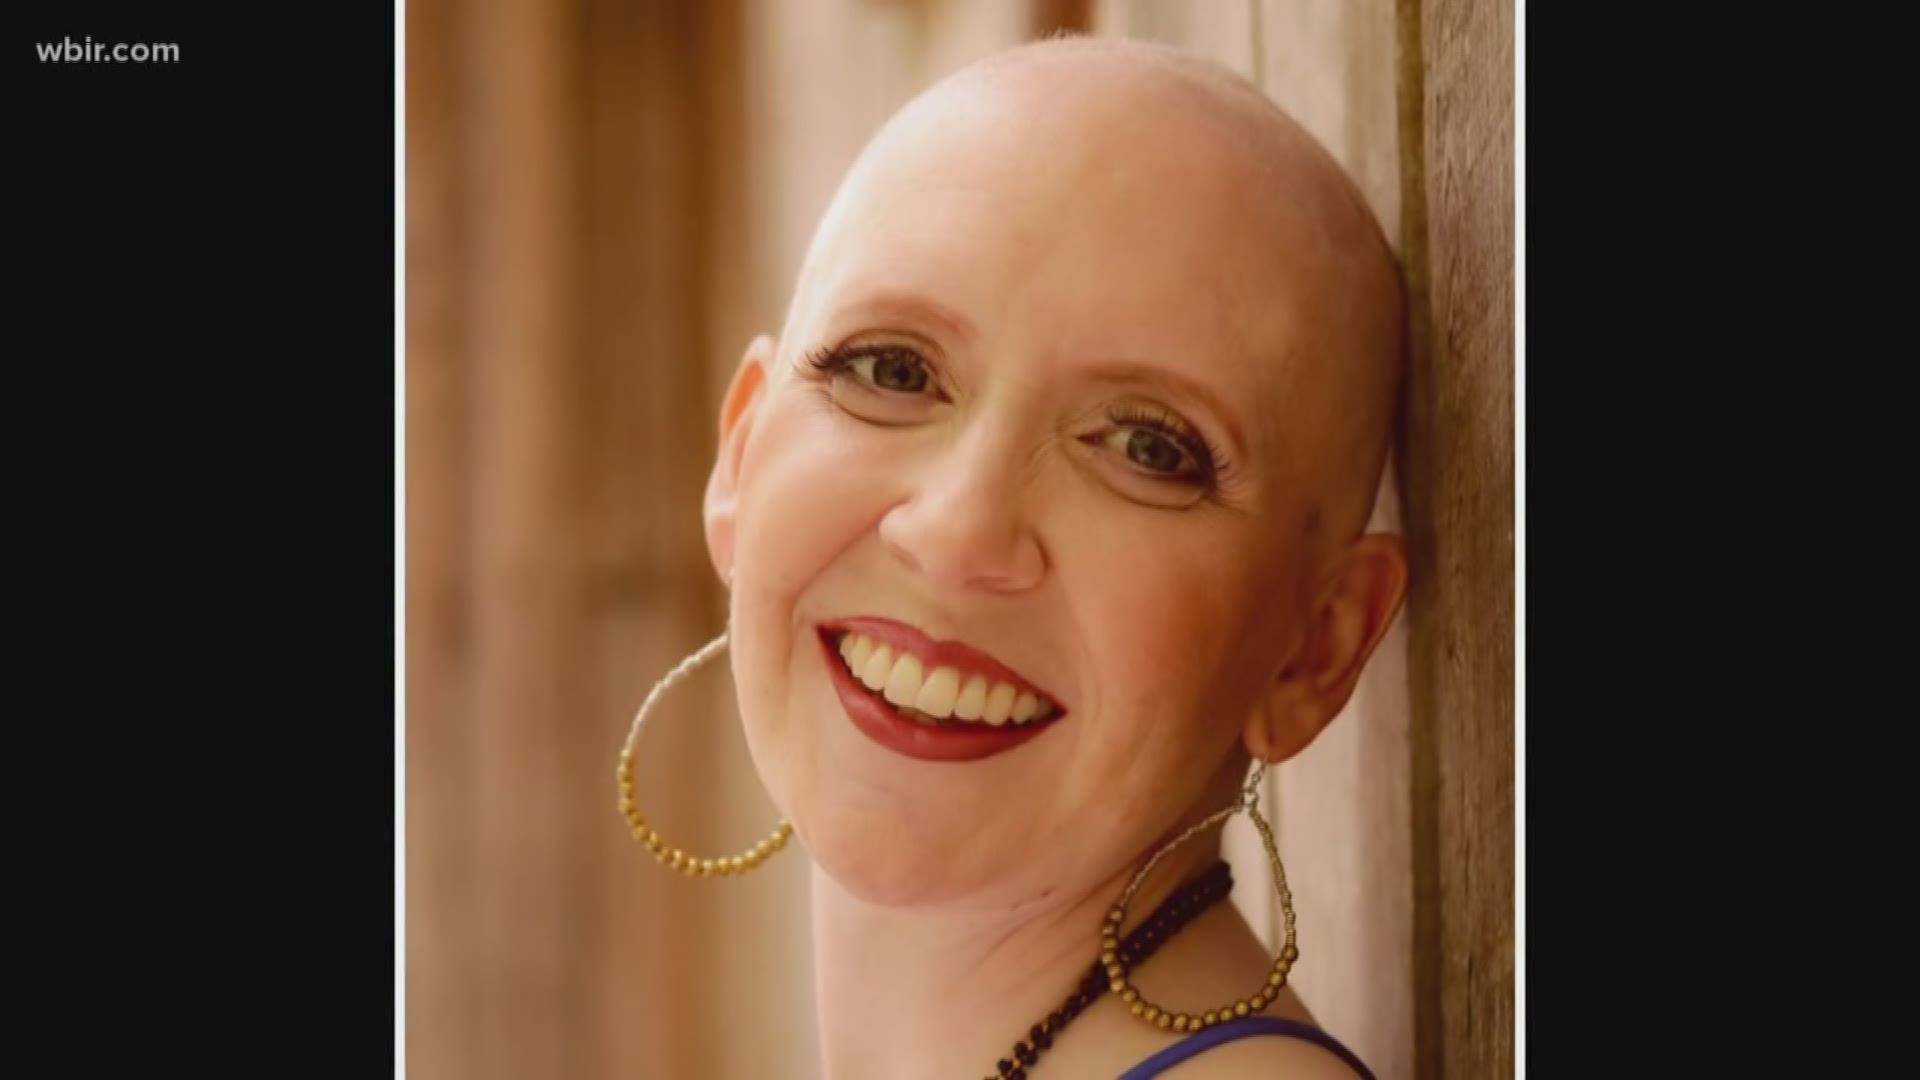 A special photo shoot shows one woman is more than her cancer diagnosis.